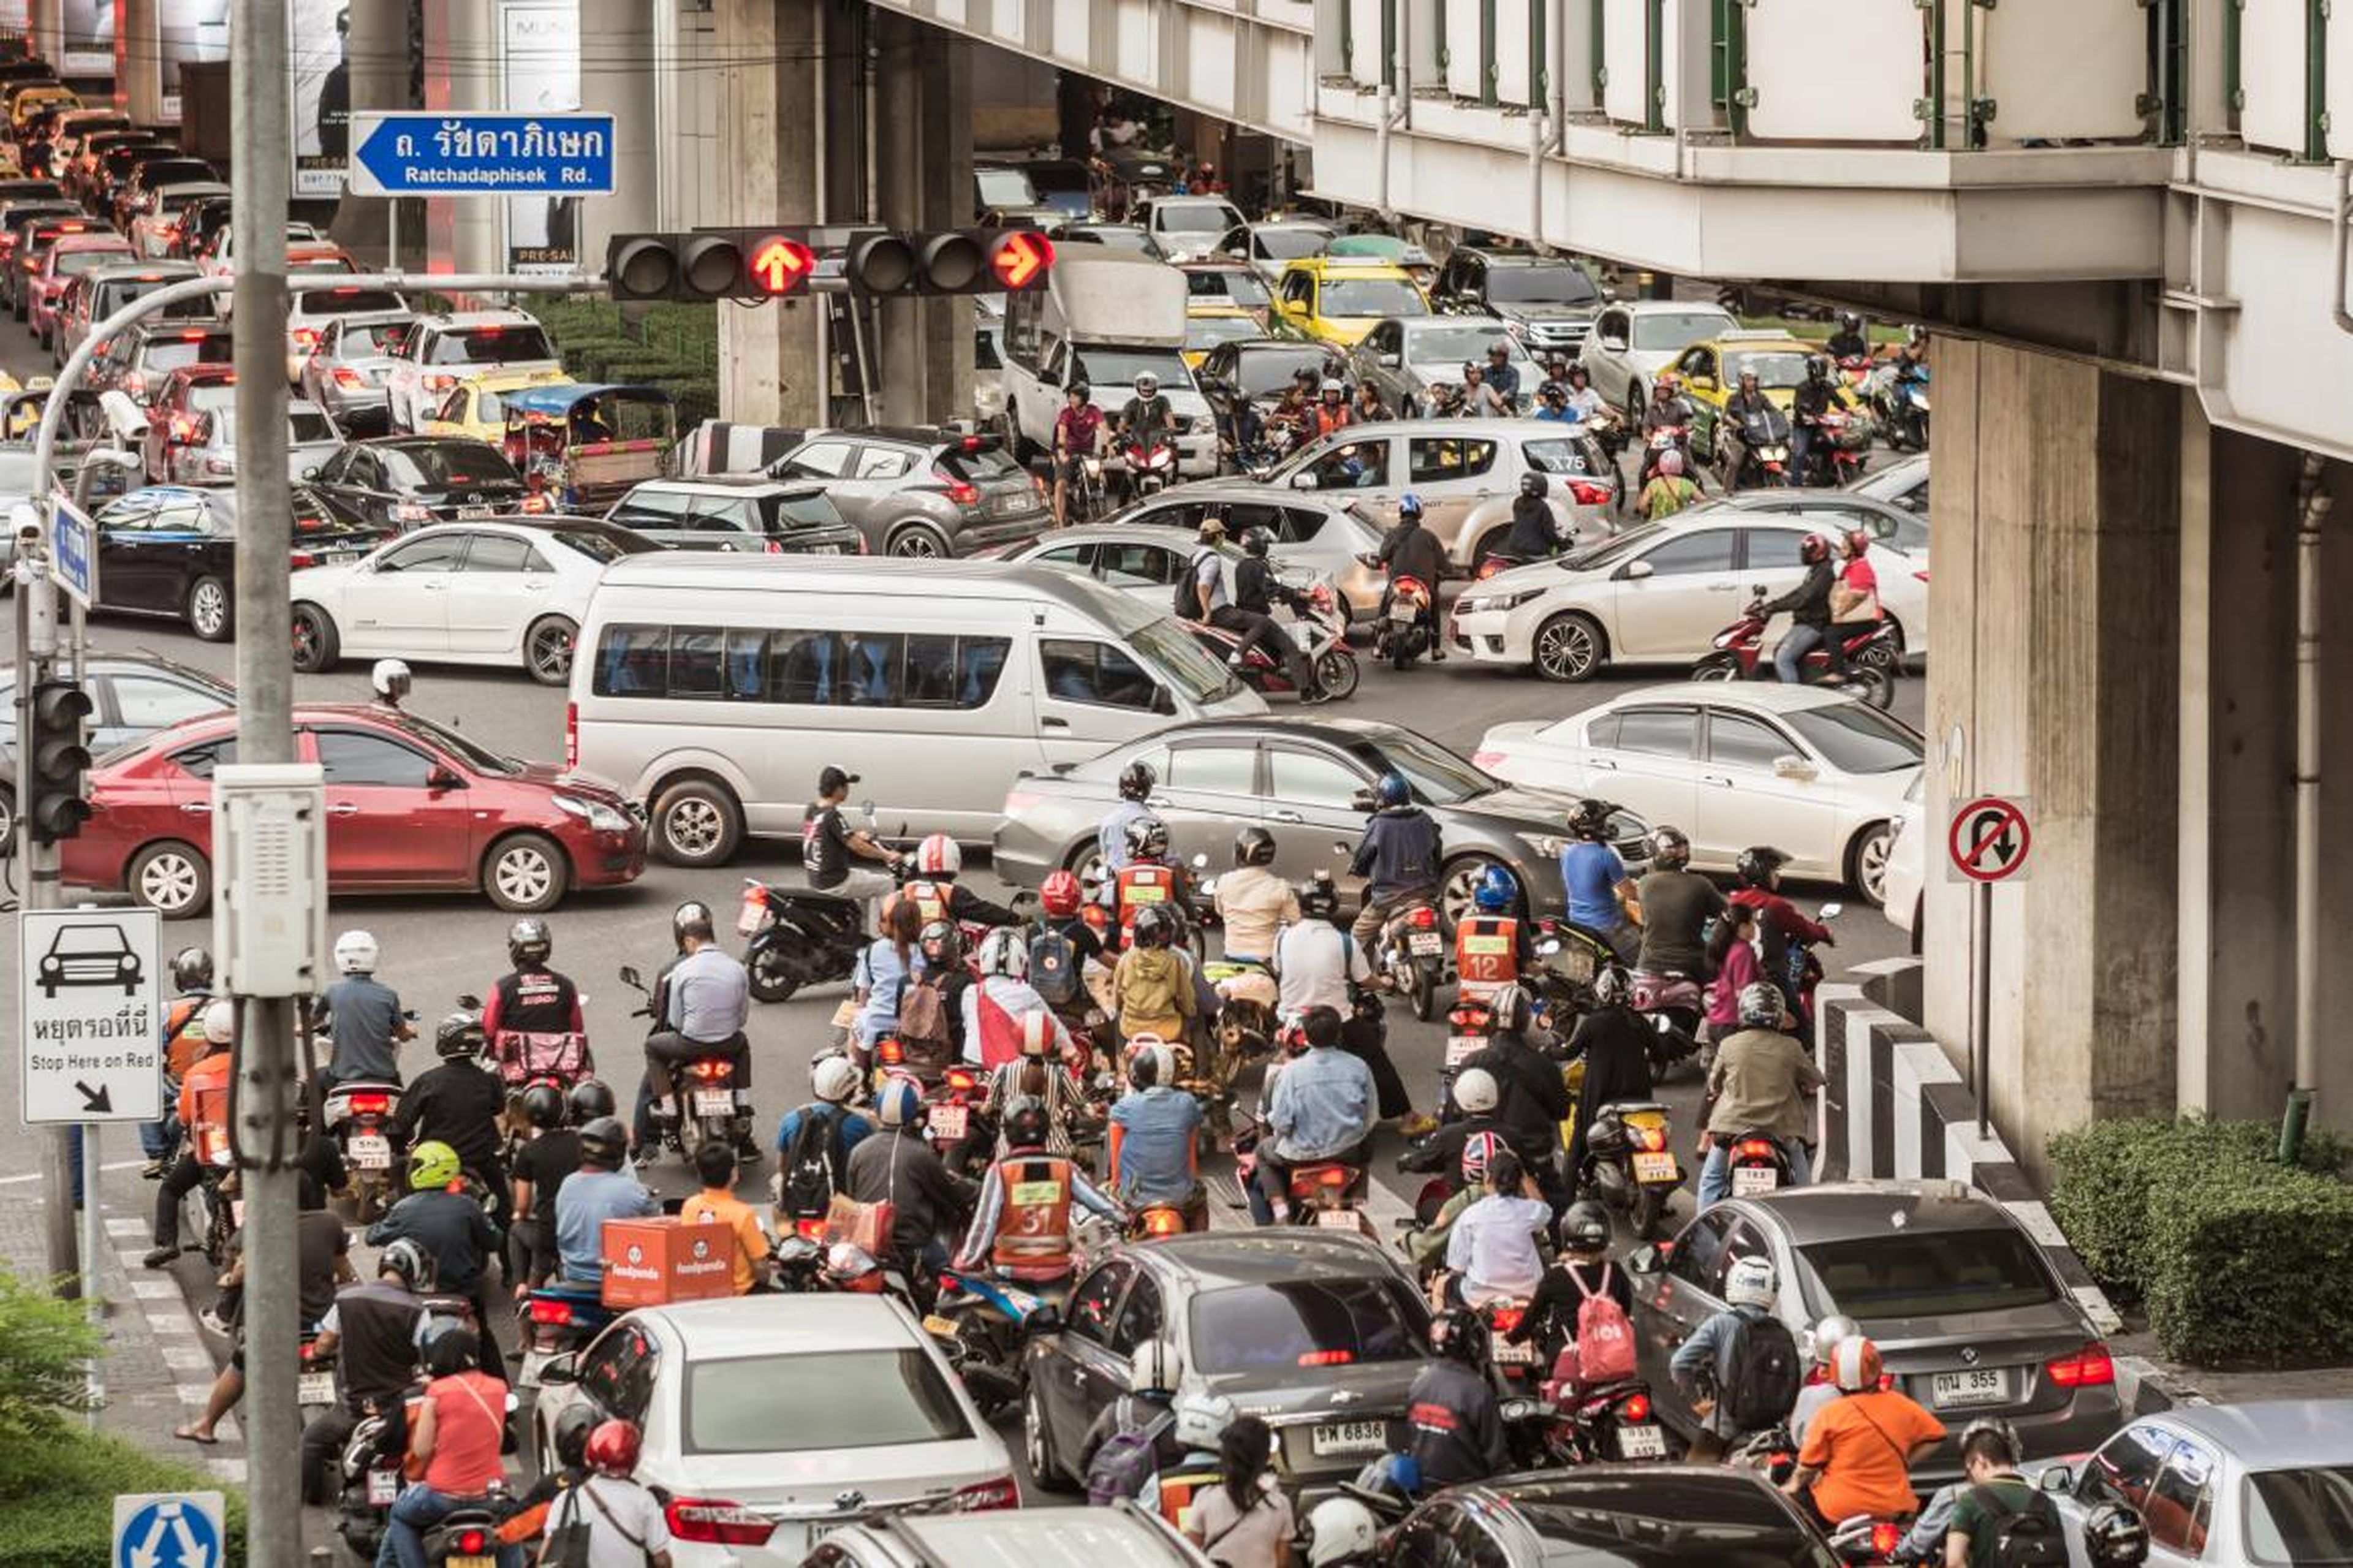 Congestion is also fed by the millions who use motorbikes to get around the city, as there are 20 million motorbikes registered in Thailand.